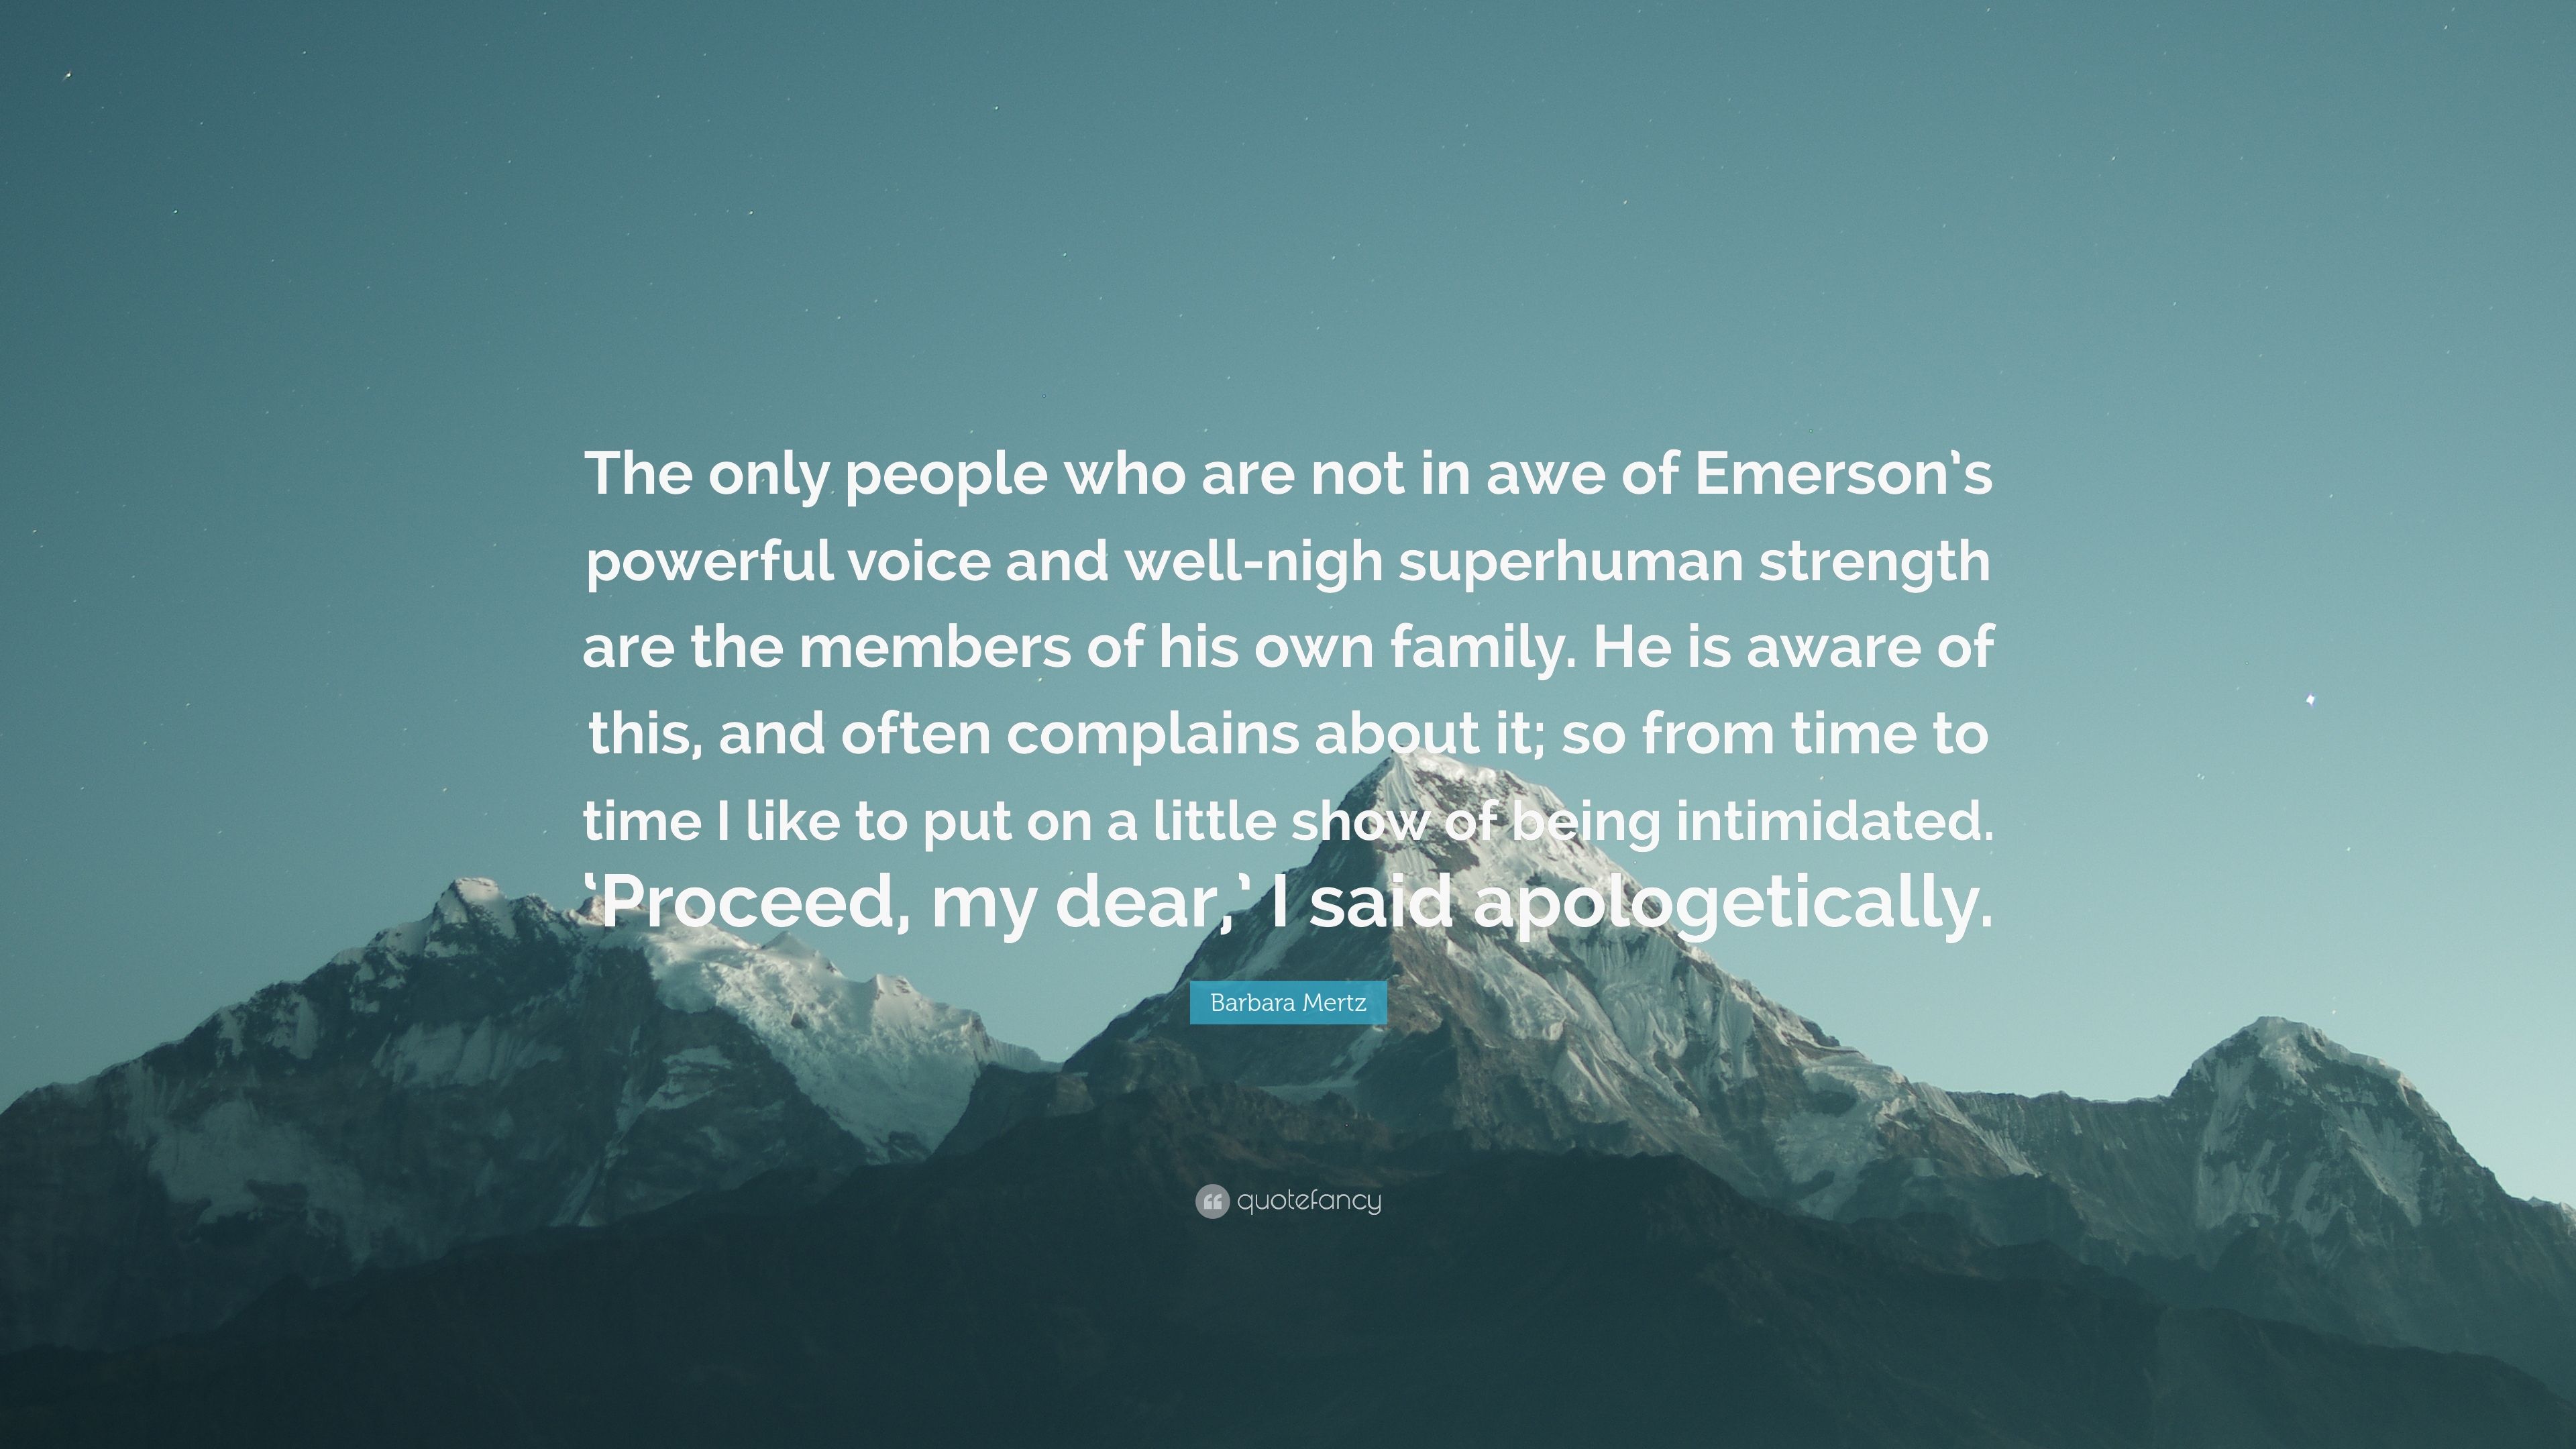 Barbara Mertz Quote: “The Only People Who Are Not In Awe Of Emerson's Powerful Voice And Well Nigh Superhuman Strength Are The Members Of His .” (7 Wallpaper)